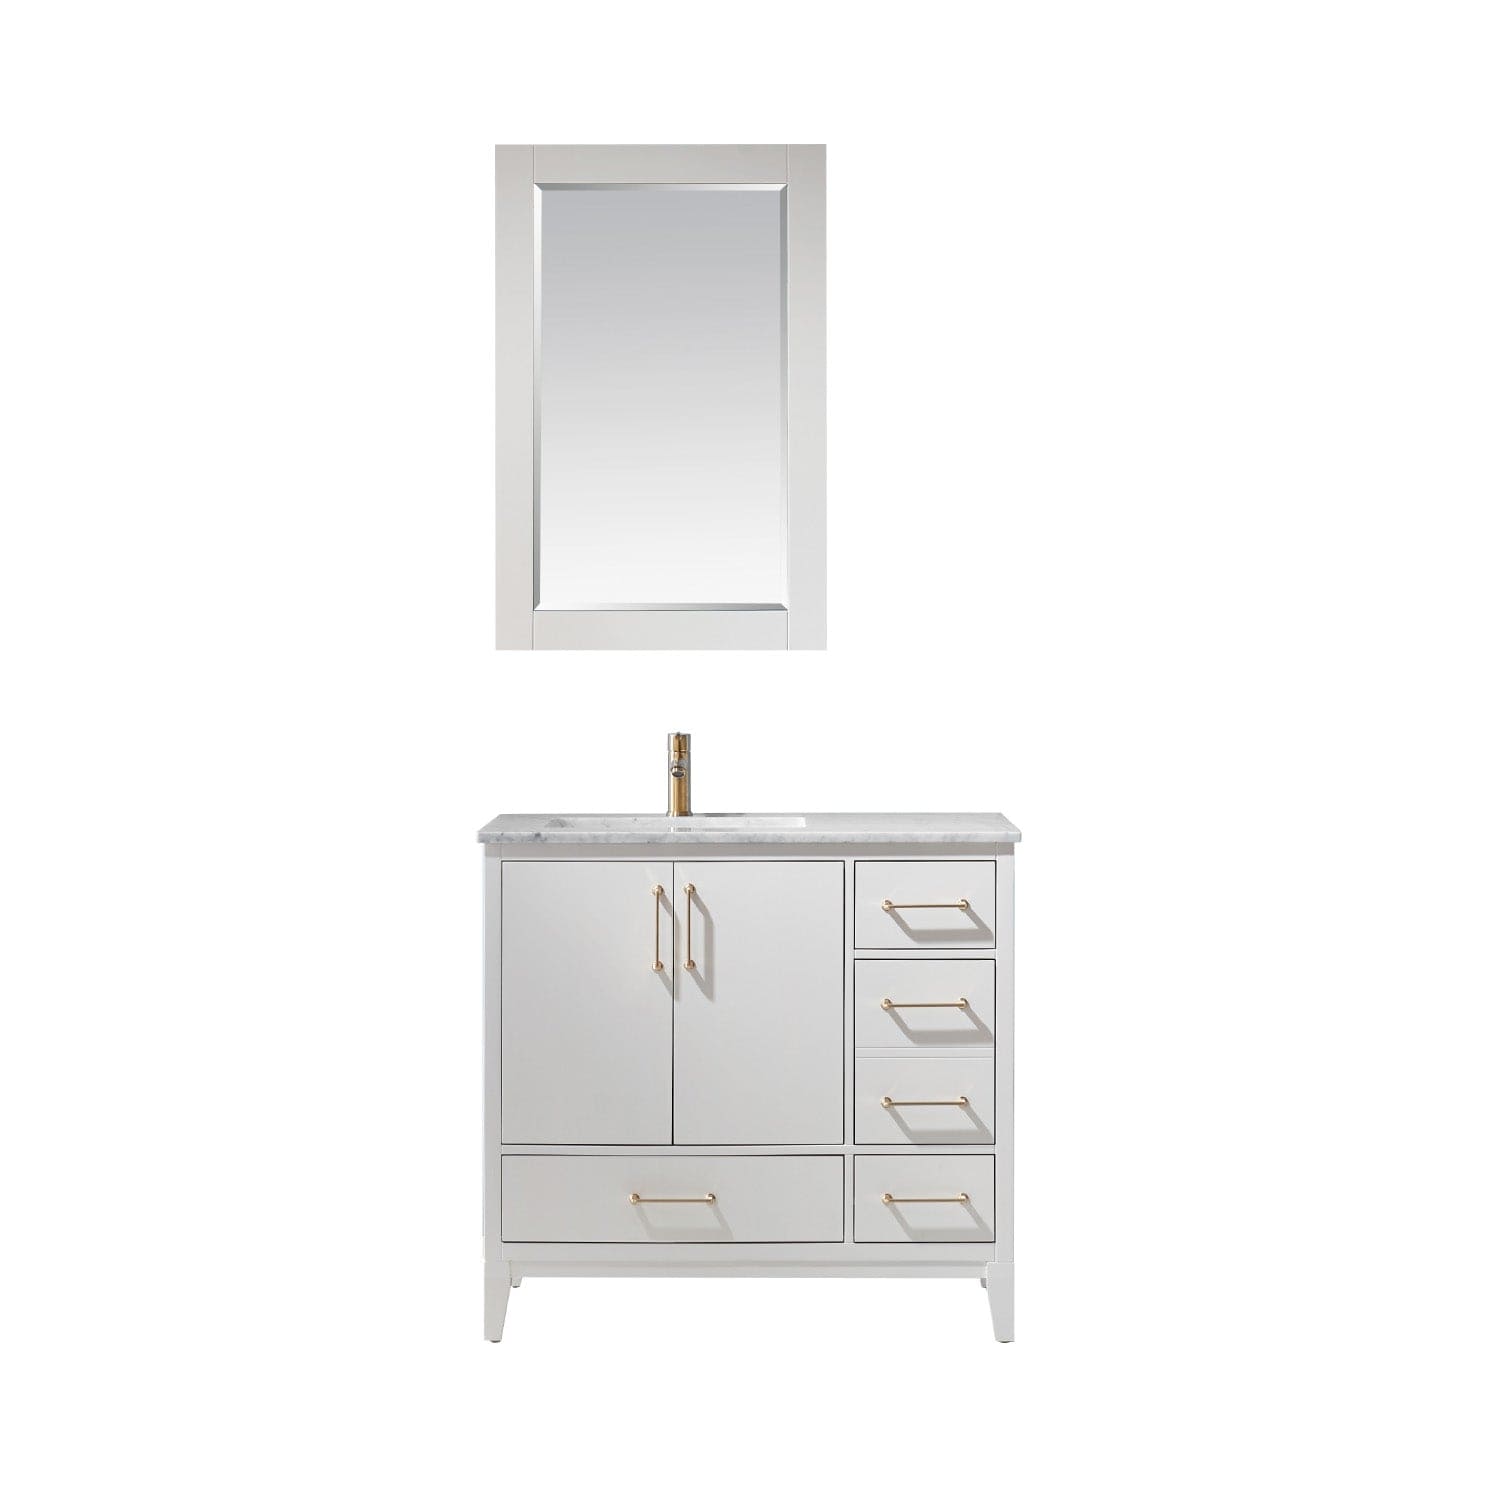 Altair Sutton 36" Single Bathroom Vanity Set in White and Carrara White Marble Countertop with Mirror 541036-WH-CA - Molaix631112971850Vanity541036-WH-CA